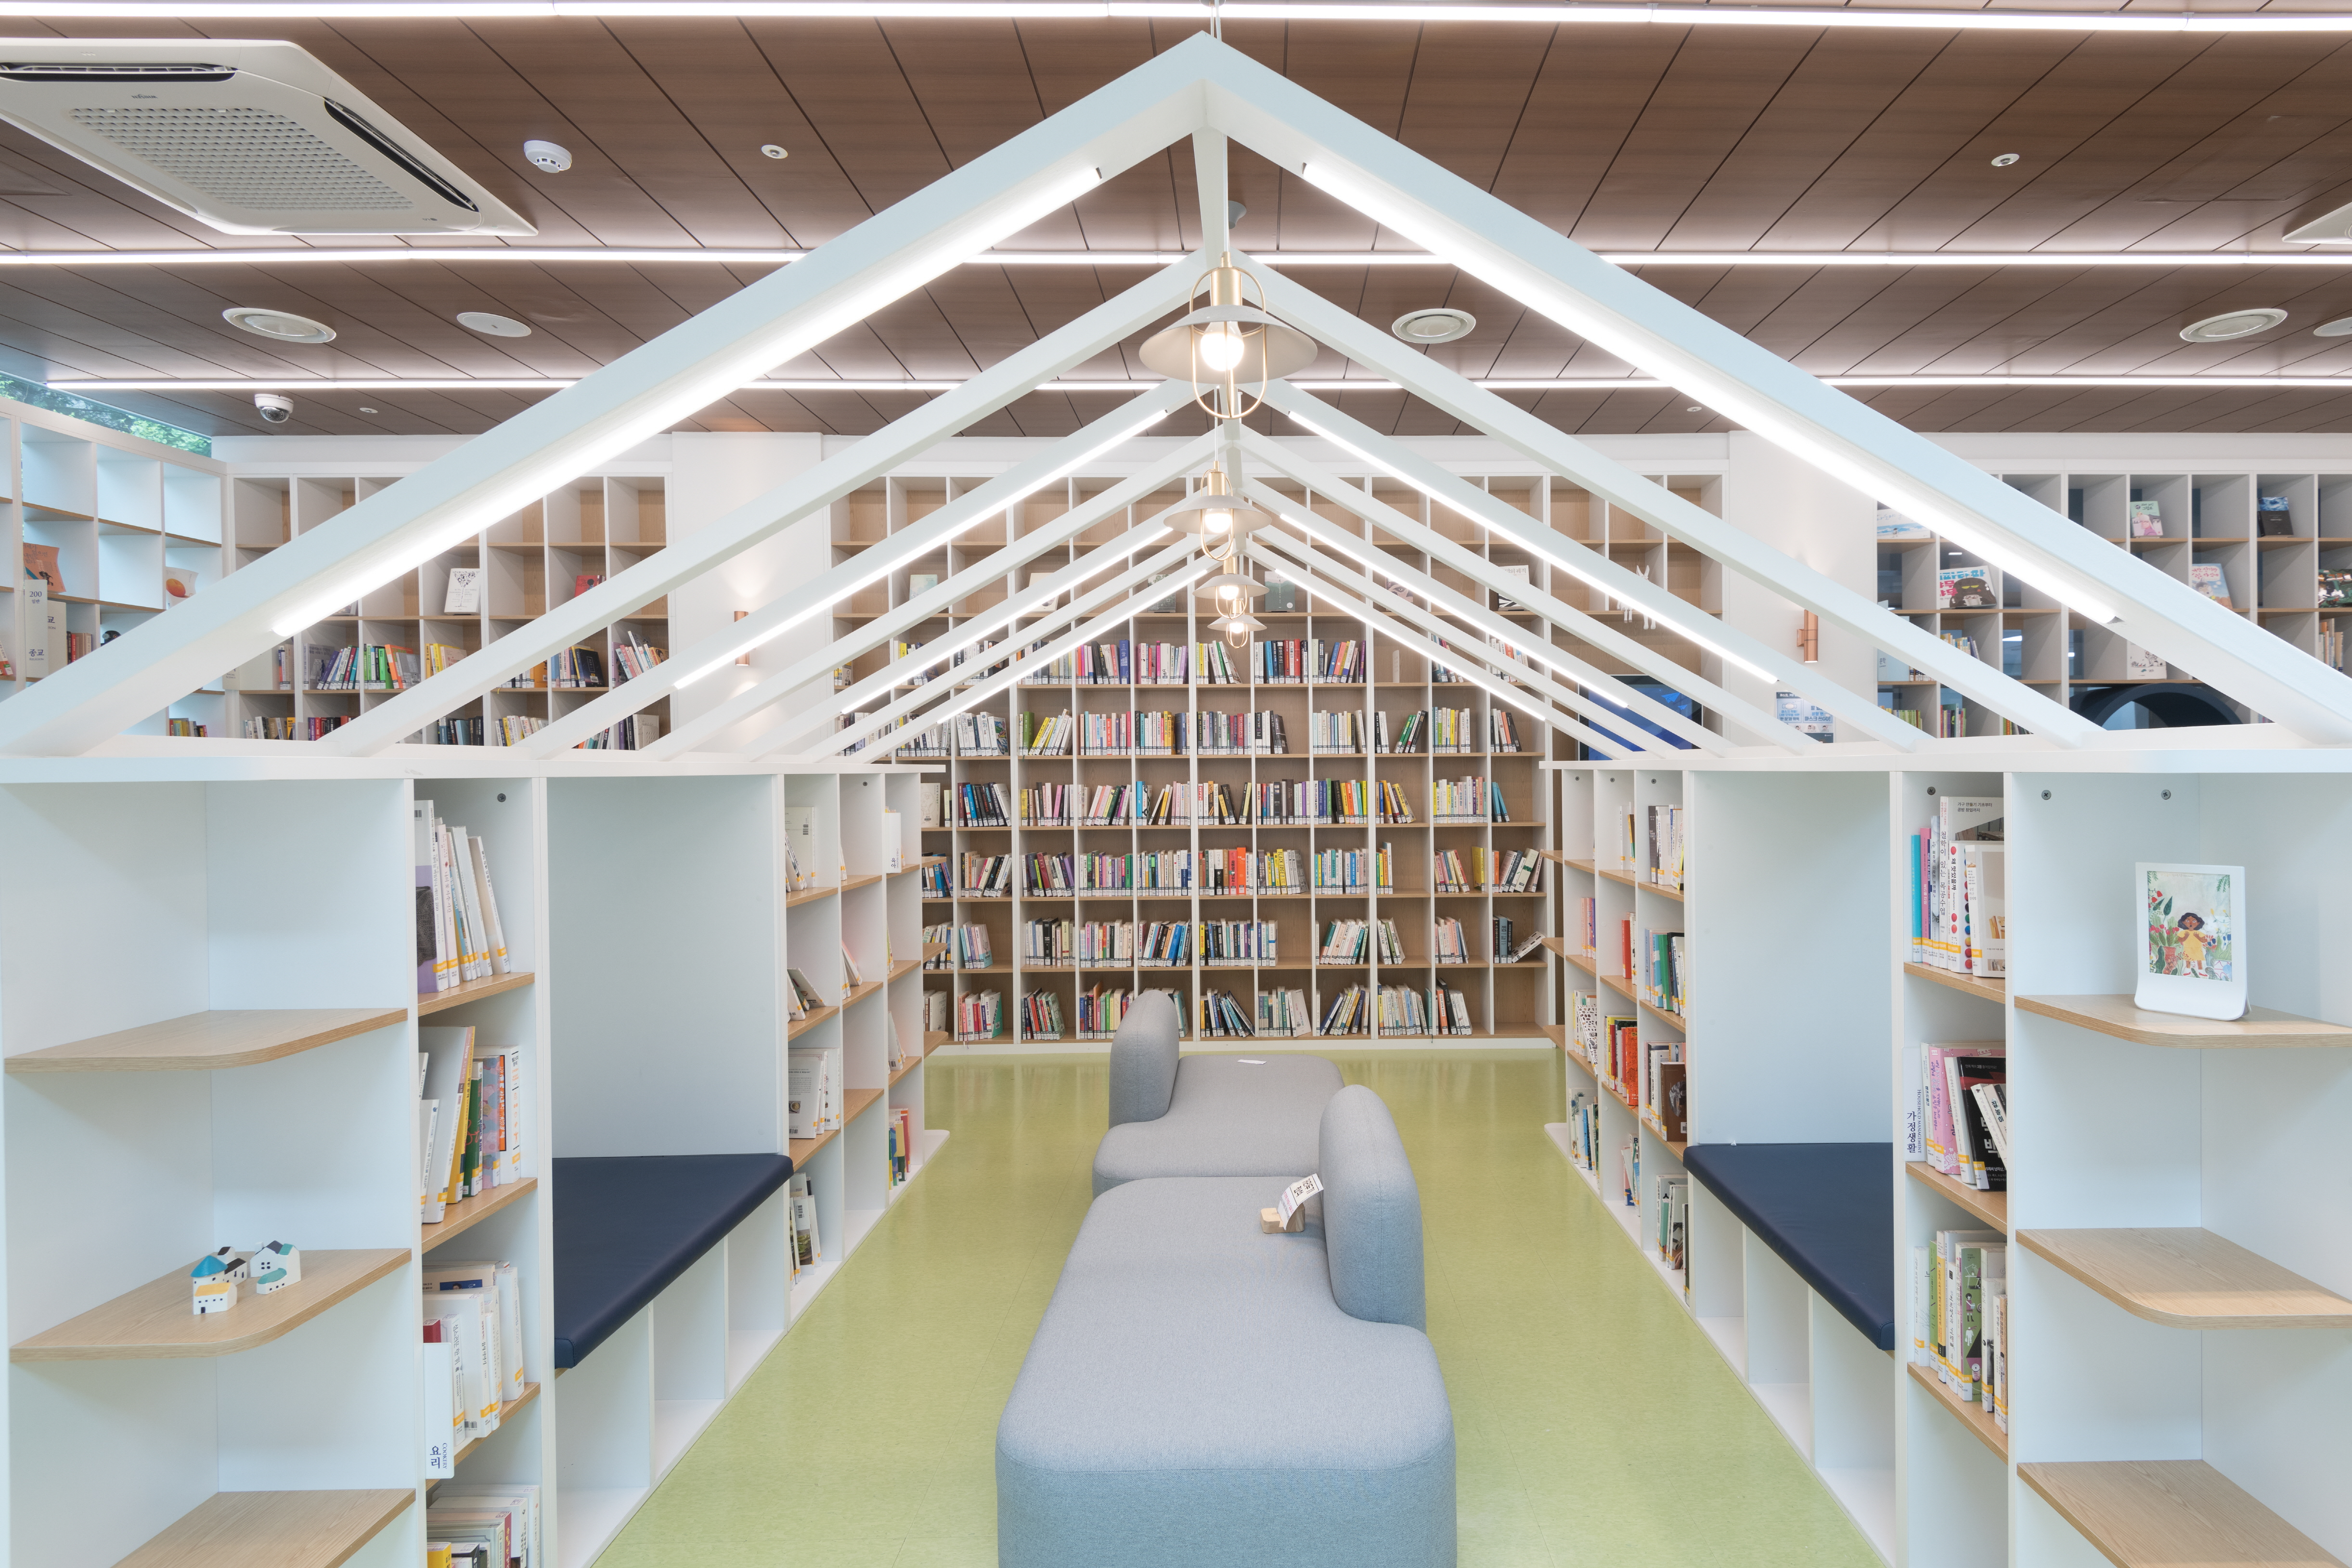 Seoul Seongbuk Media Culture Maru6 : The inside with a large number of books and a space to relax 4
